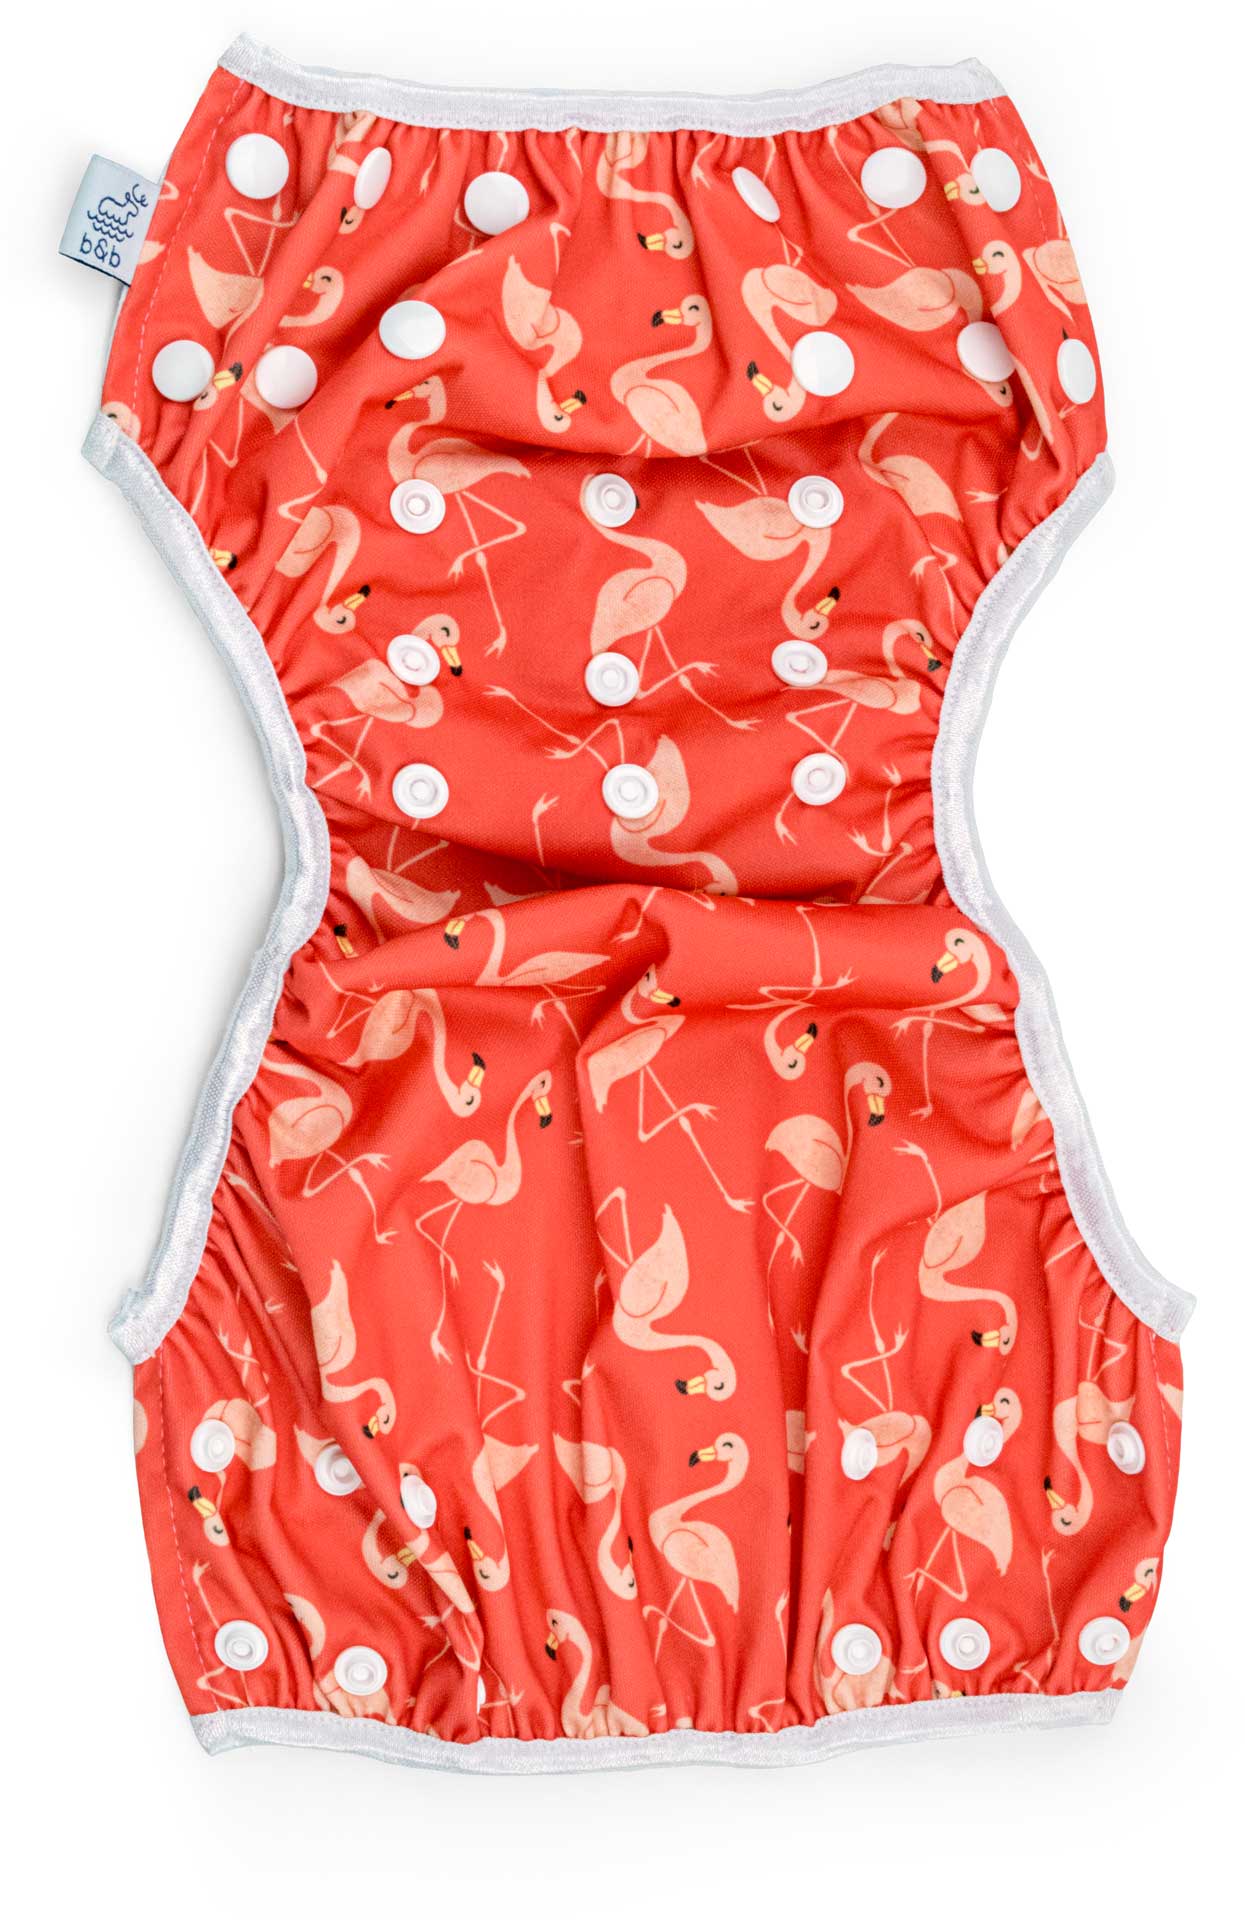 Beau and Belle Littles Swim Diaper, Regular Size, dark pink with light pink flamingos, unbuttoned and laid out flat